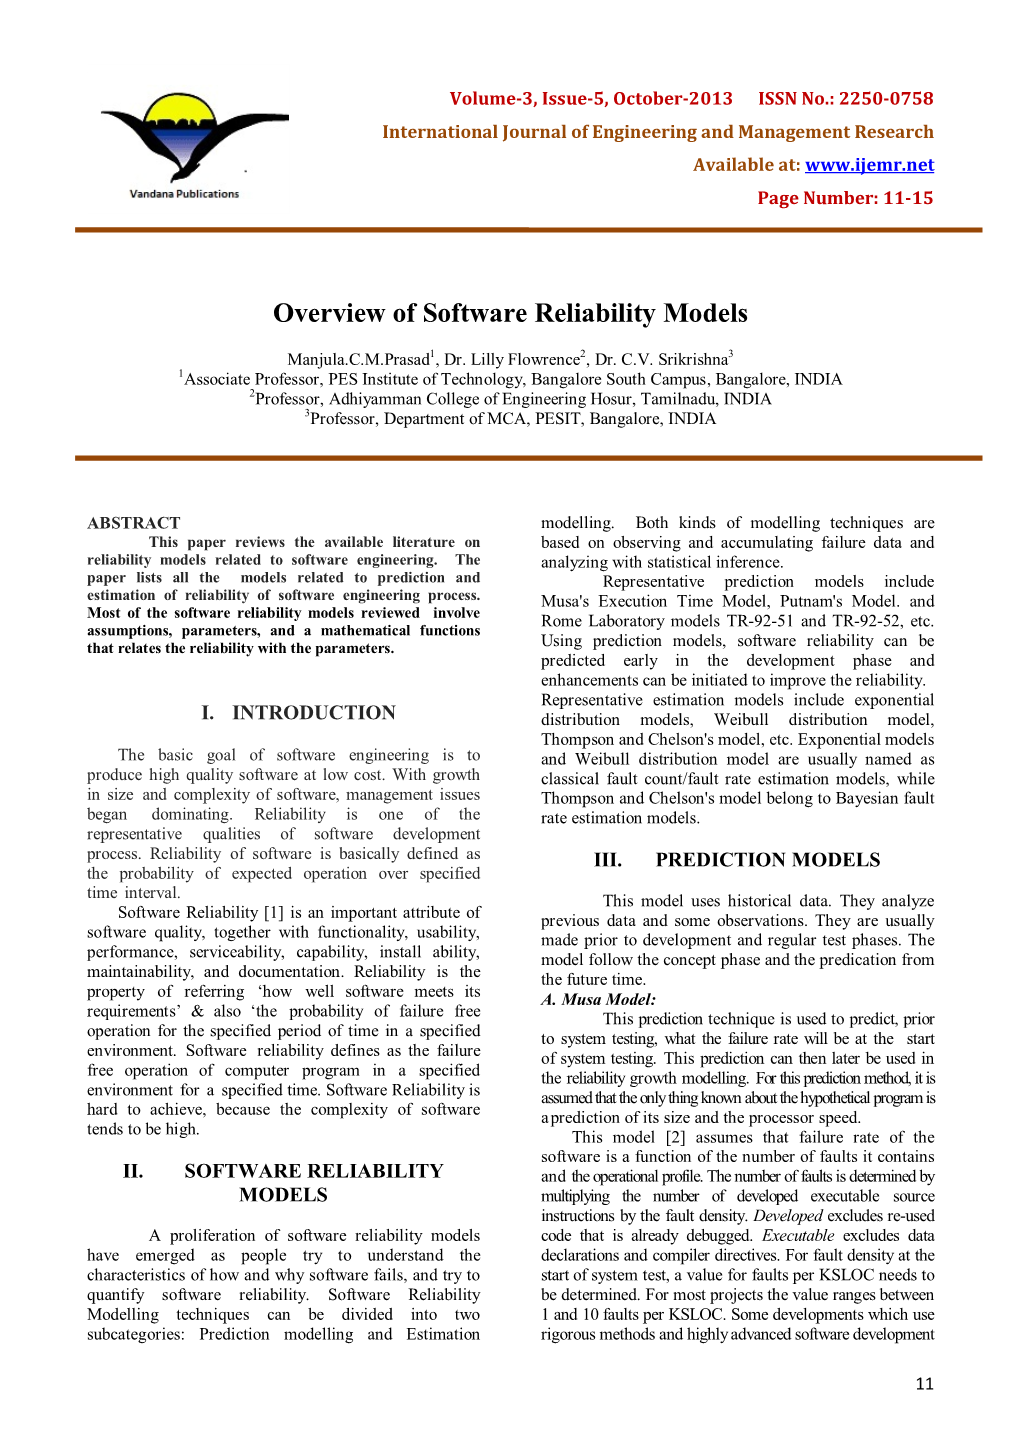 Overview of Software Reliability Models